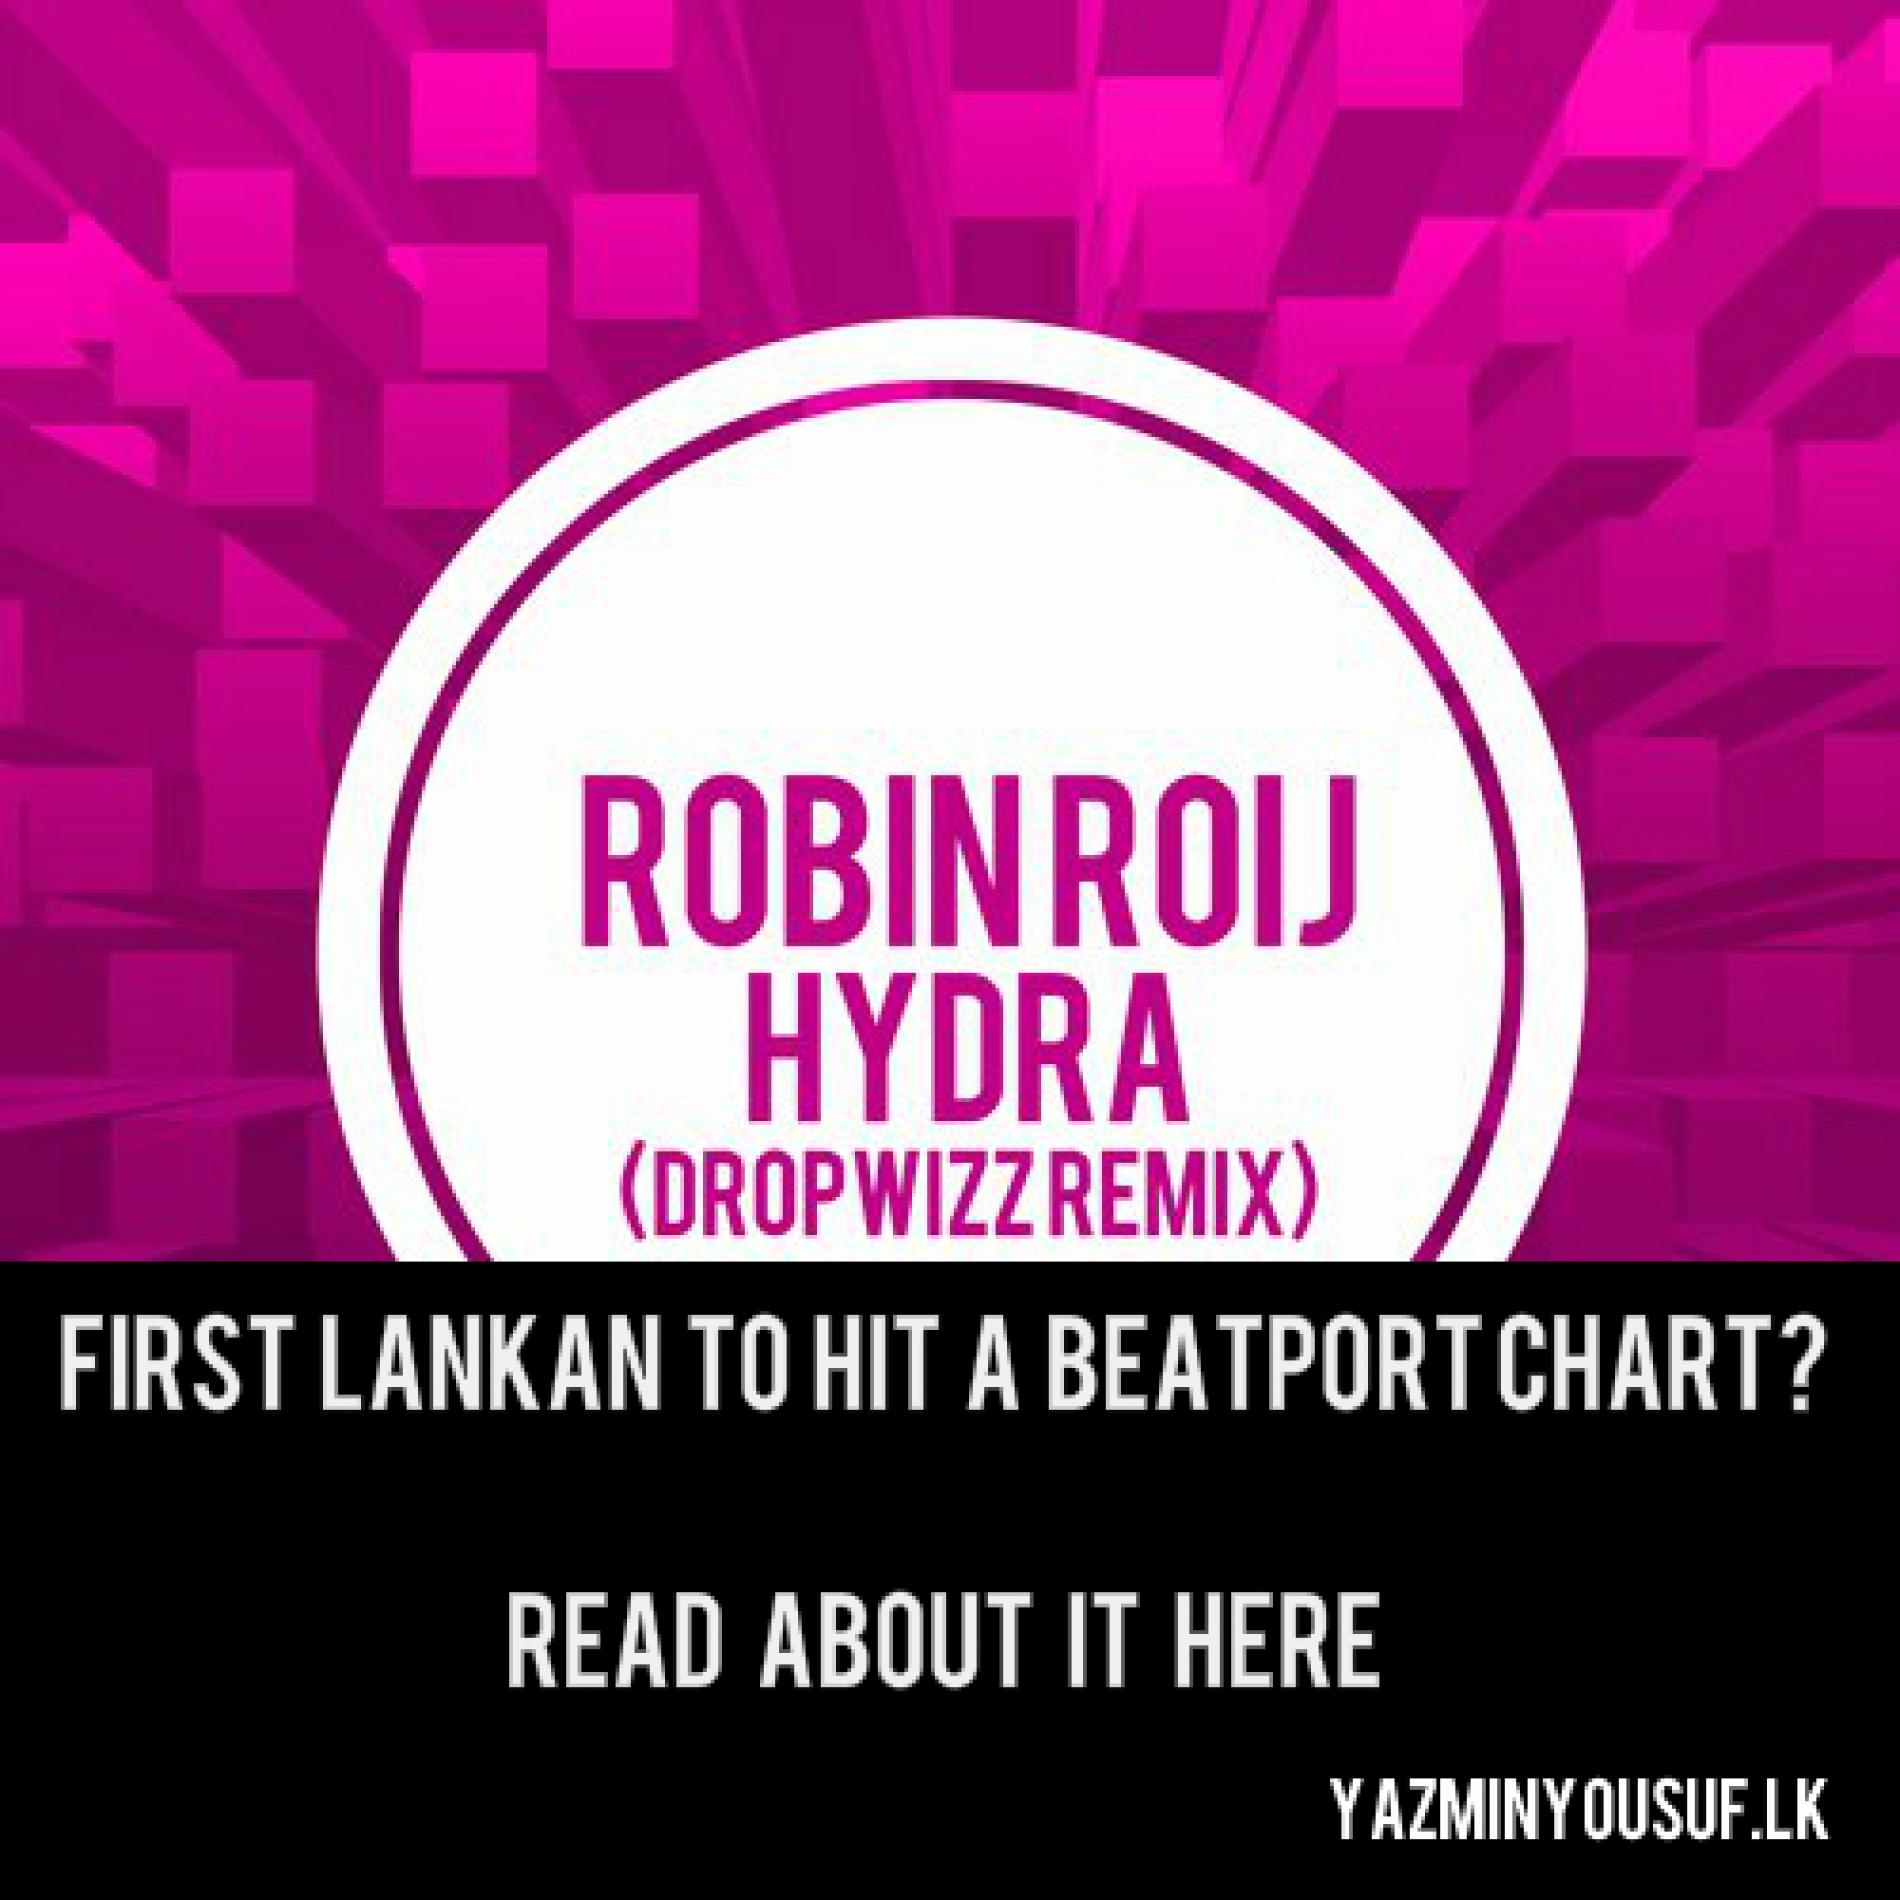 Dropwizz: The First Lankan On The Beatport Glitch Hop Charts!